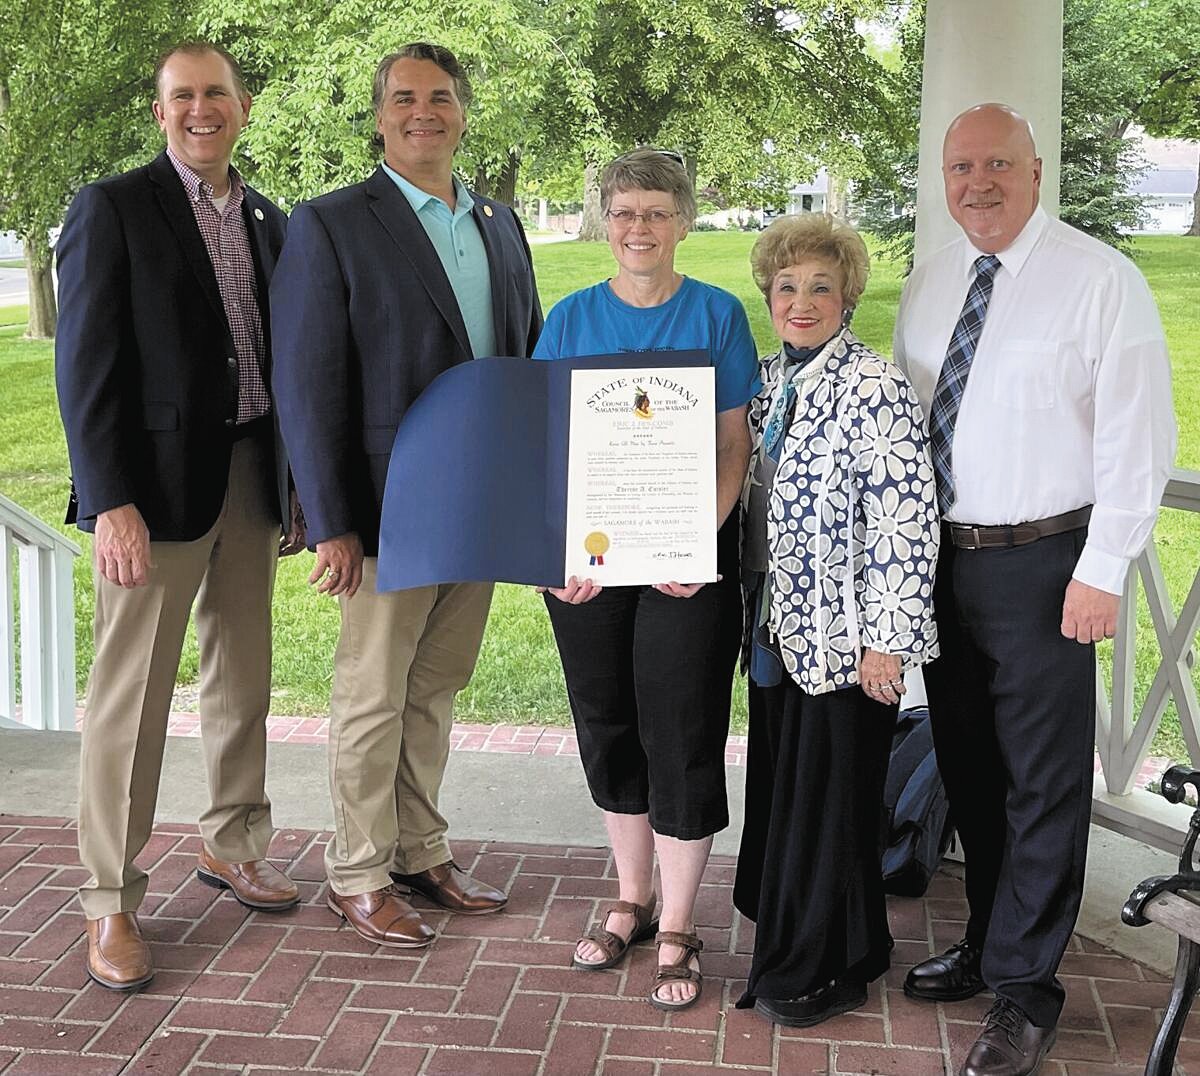 Therese Eutsler, center, was presented Monday with a Sagamore of the Wabash award. Pictured with her, from left, are State Rep. Beau Baird, State Sen. Brian Buchanan, State Rep. Sheila Klinker and Crawfordsville Mayor Todd Barton.